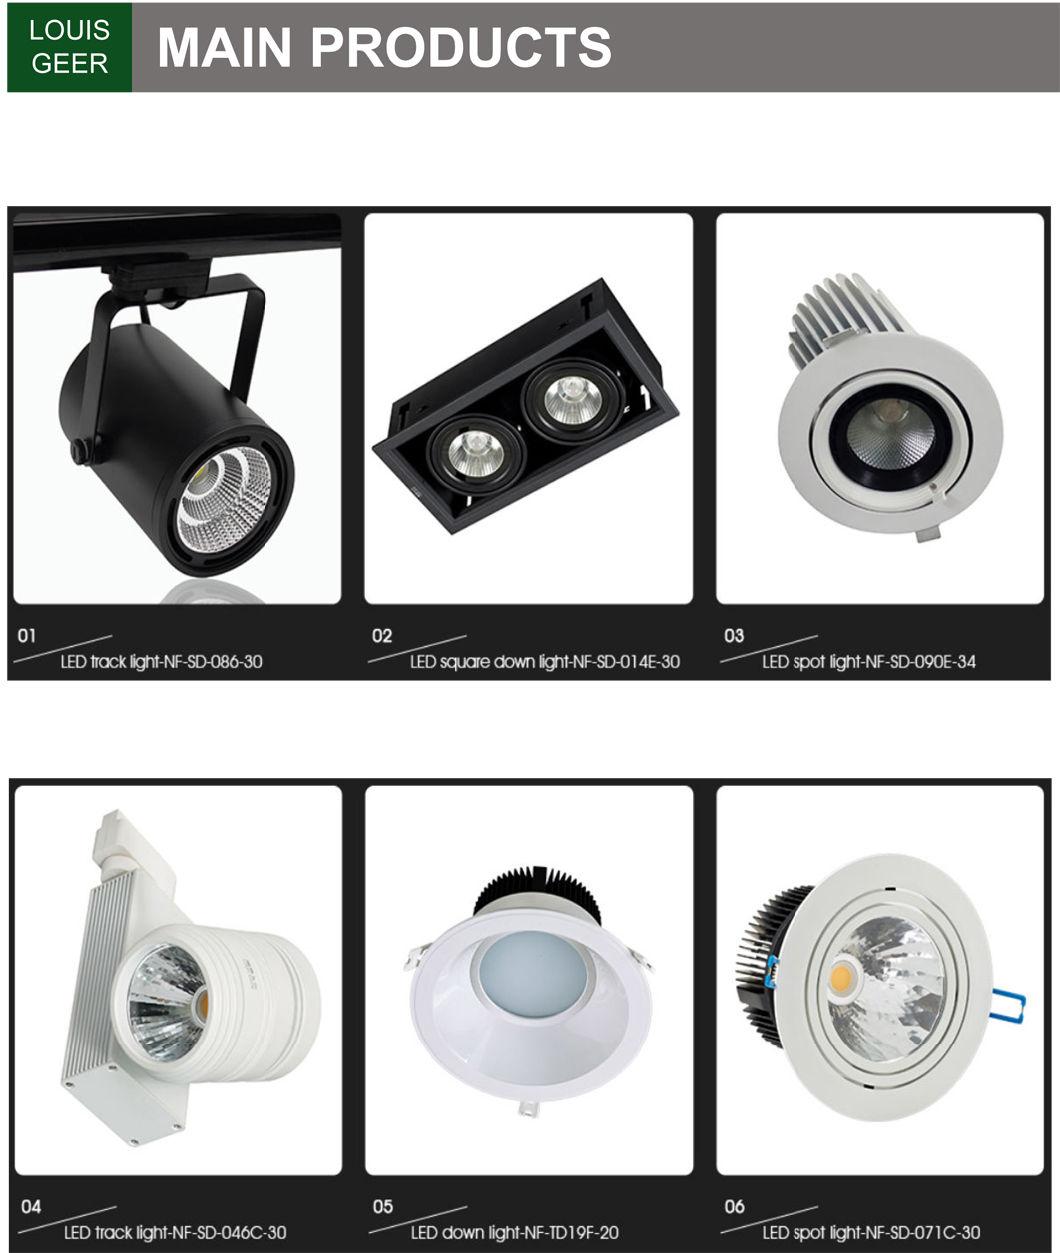 Good Quality Dimmable 80/90/95/97ra LED Down Light with Triac, Dali, 0-10V Dimmable Optional